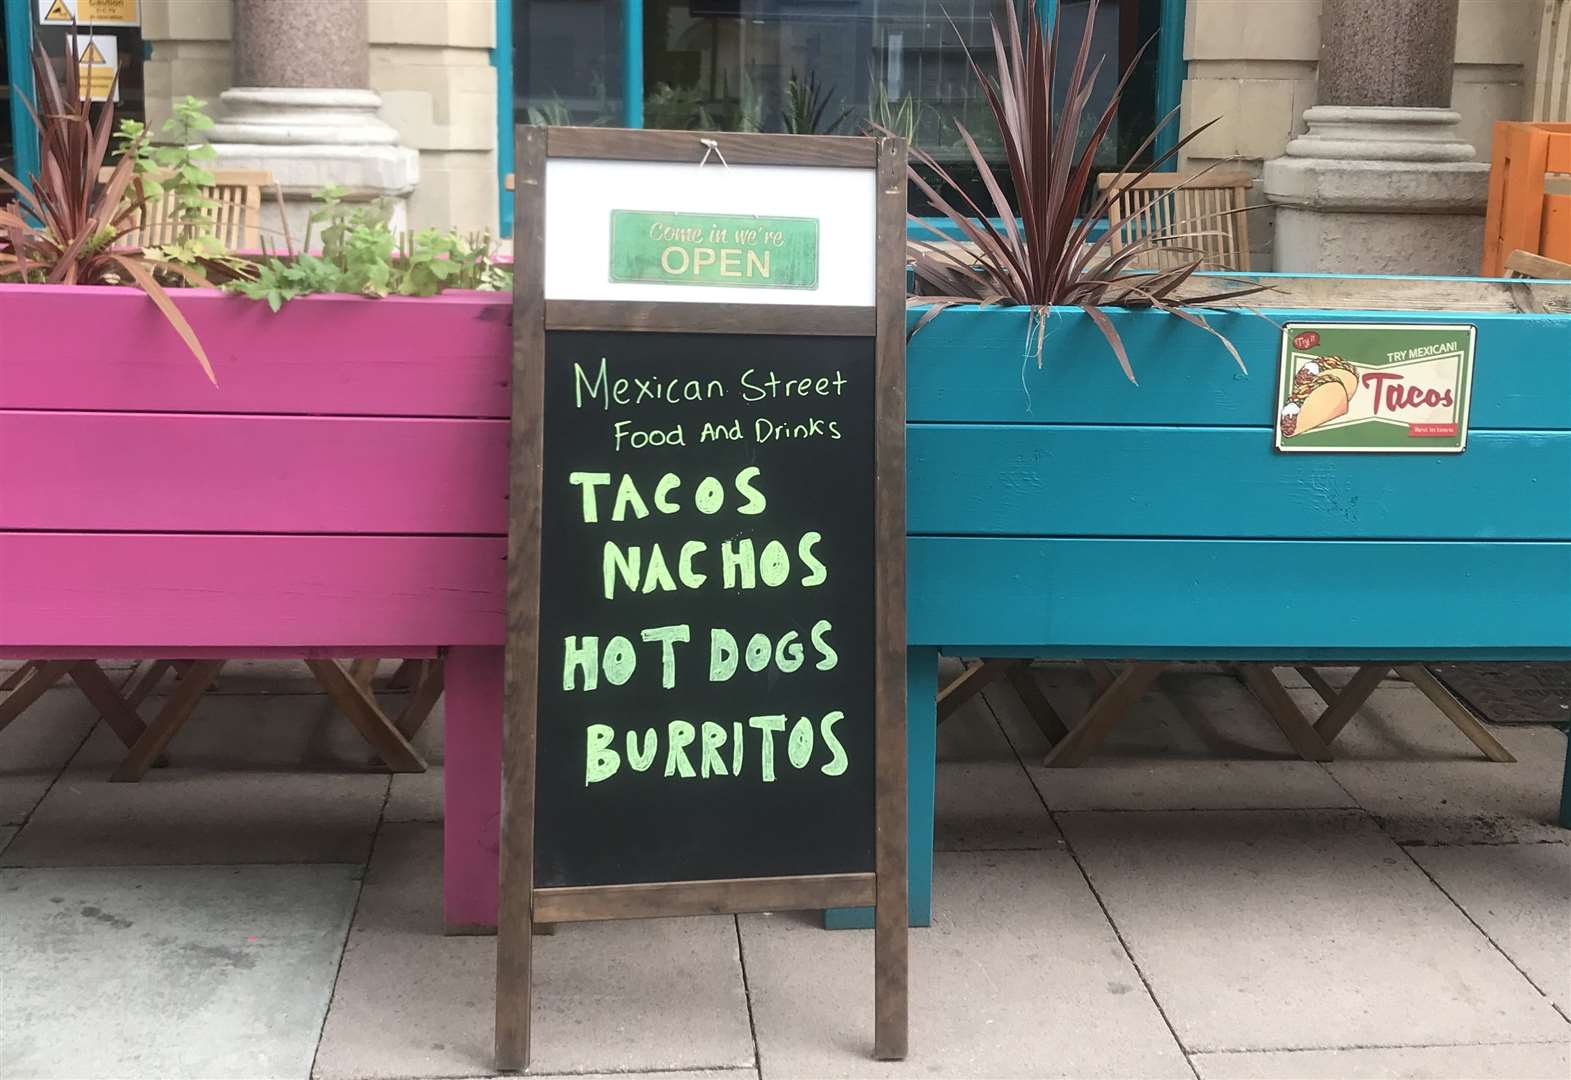 Mexican restaurant comes to town